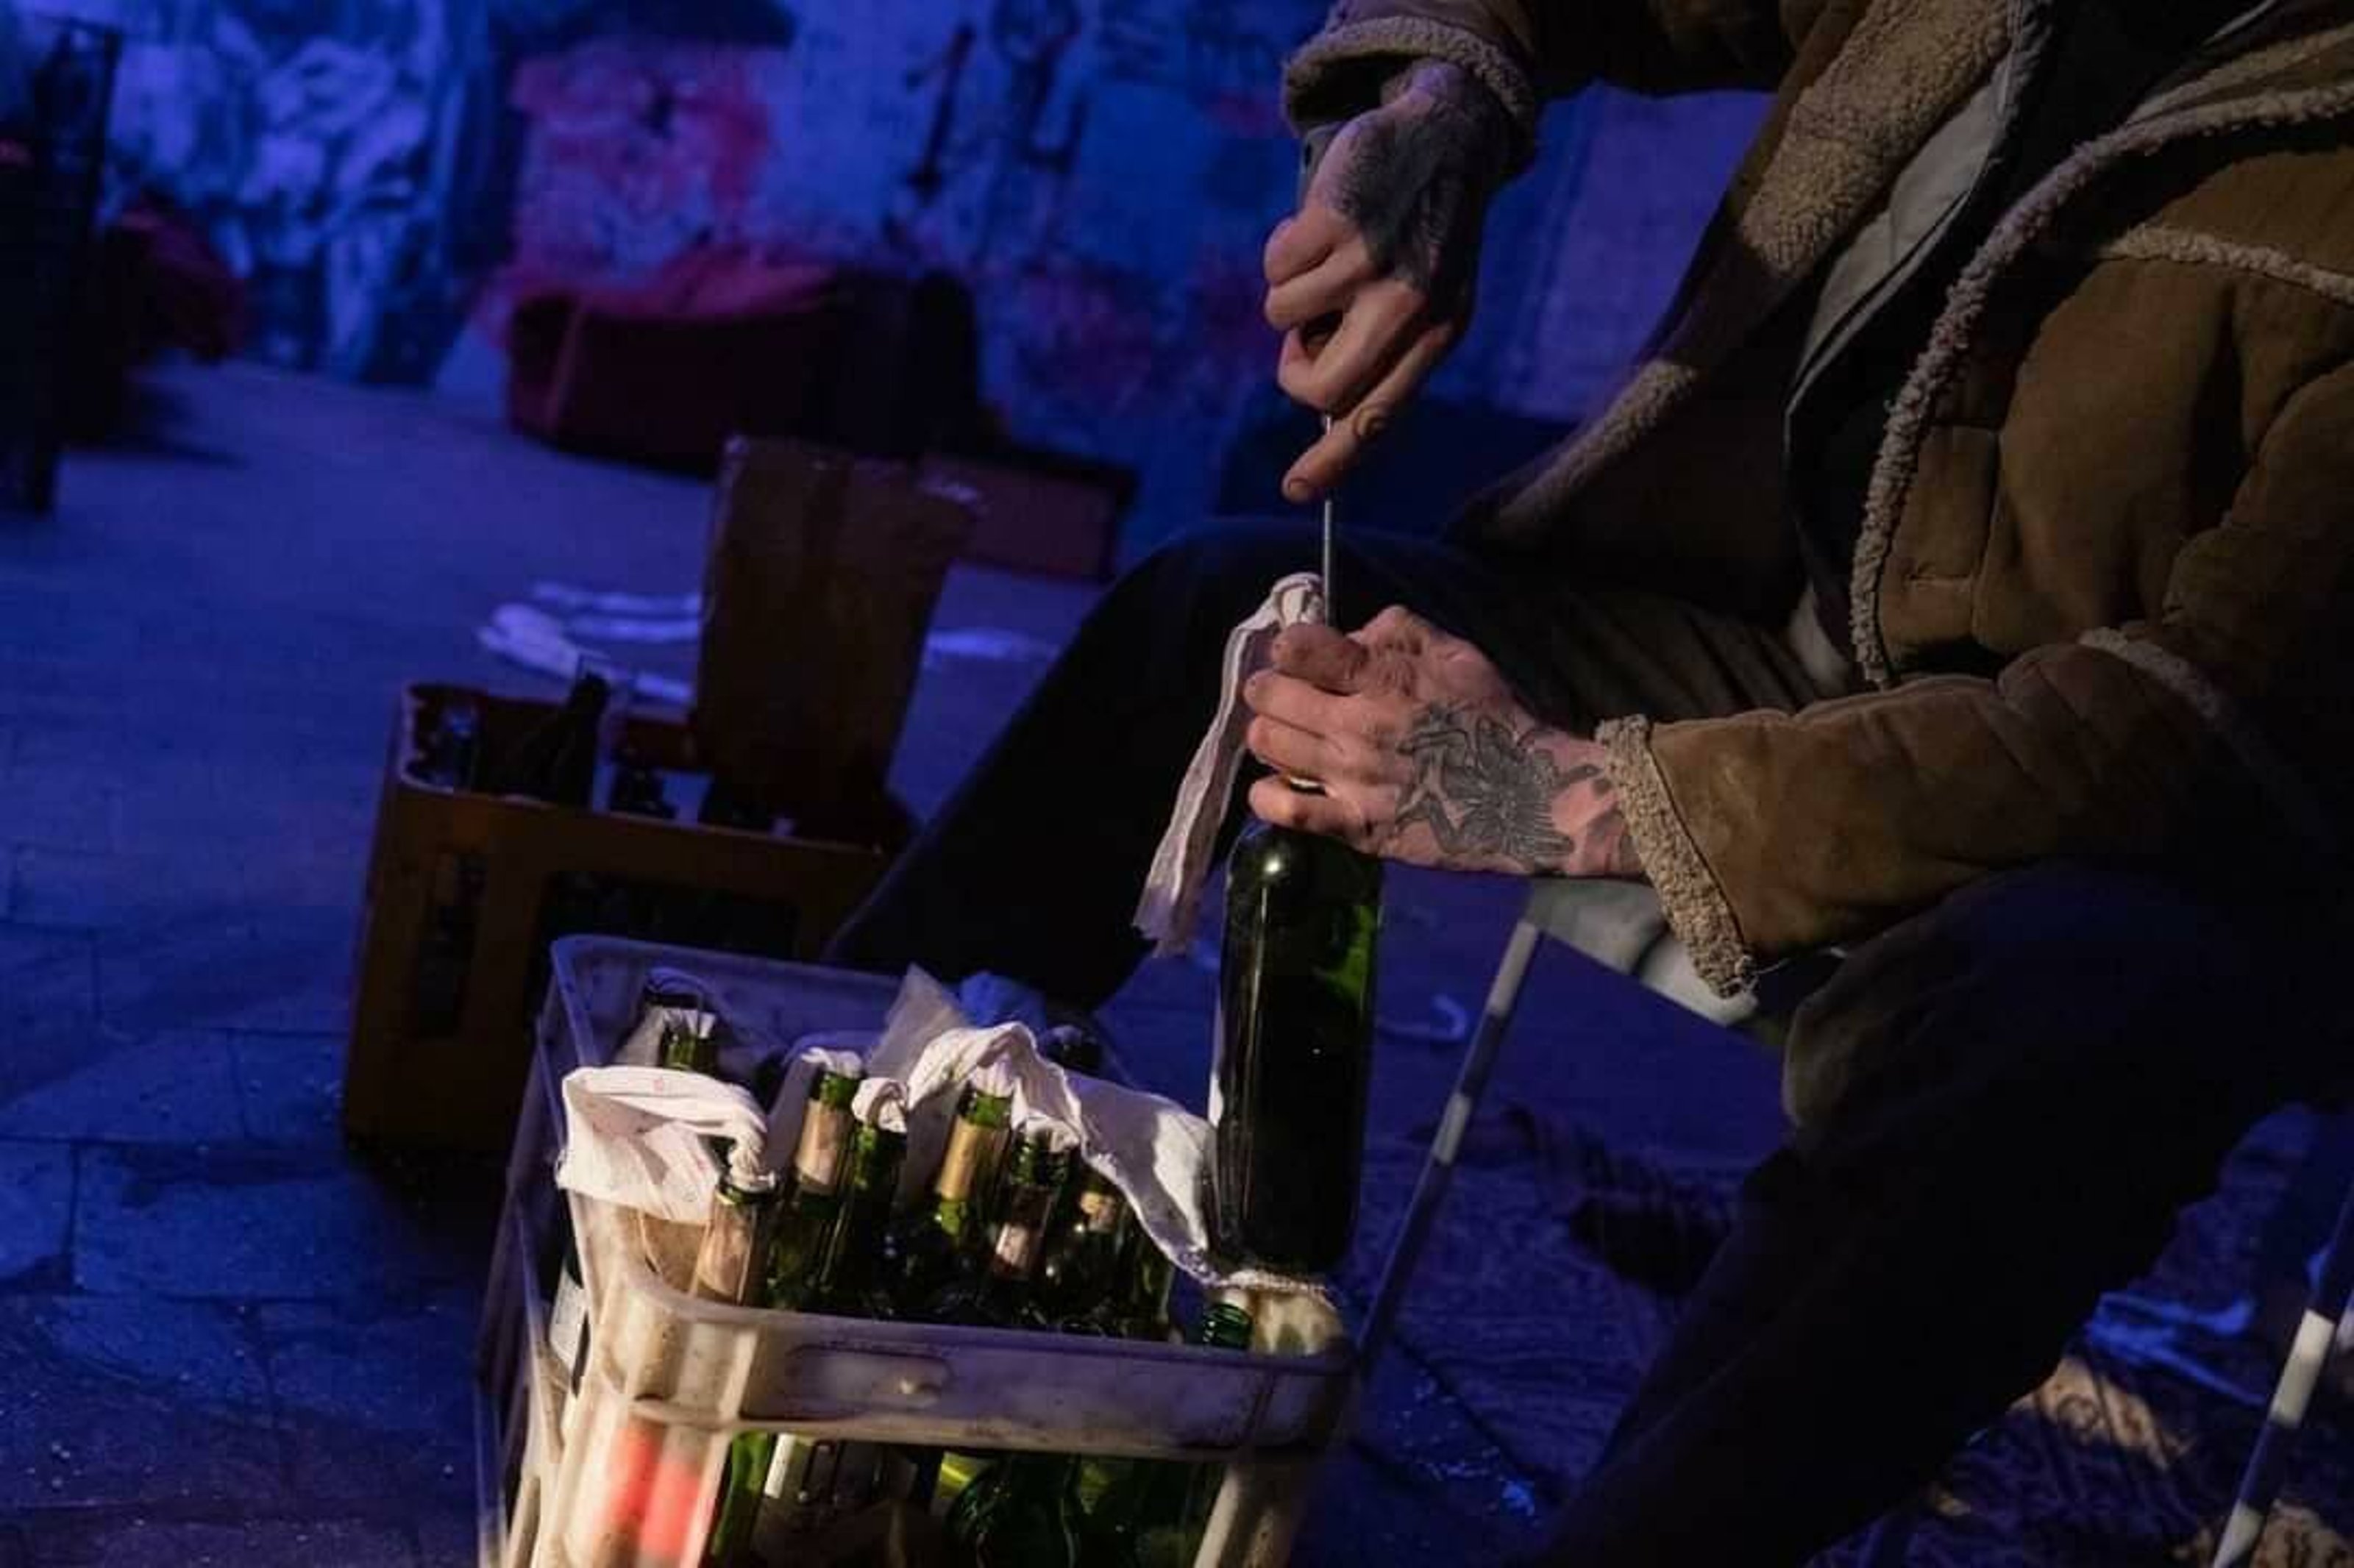 photo from live performance of Otel by Emergency Support Initiative. Two people sitting in a dimly lit room with scribbled-down walls and bottles of alcohol on the floor.